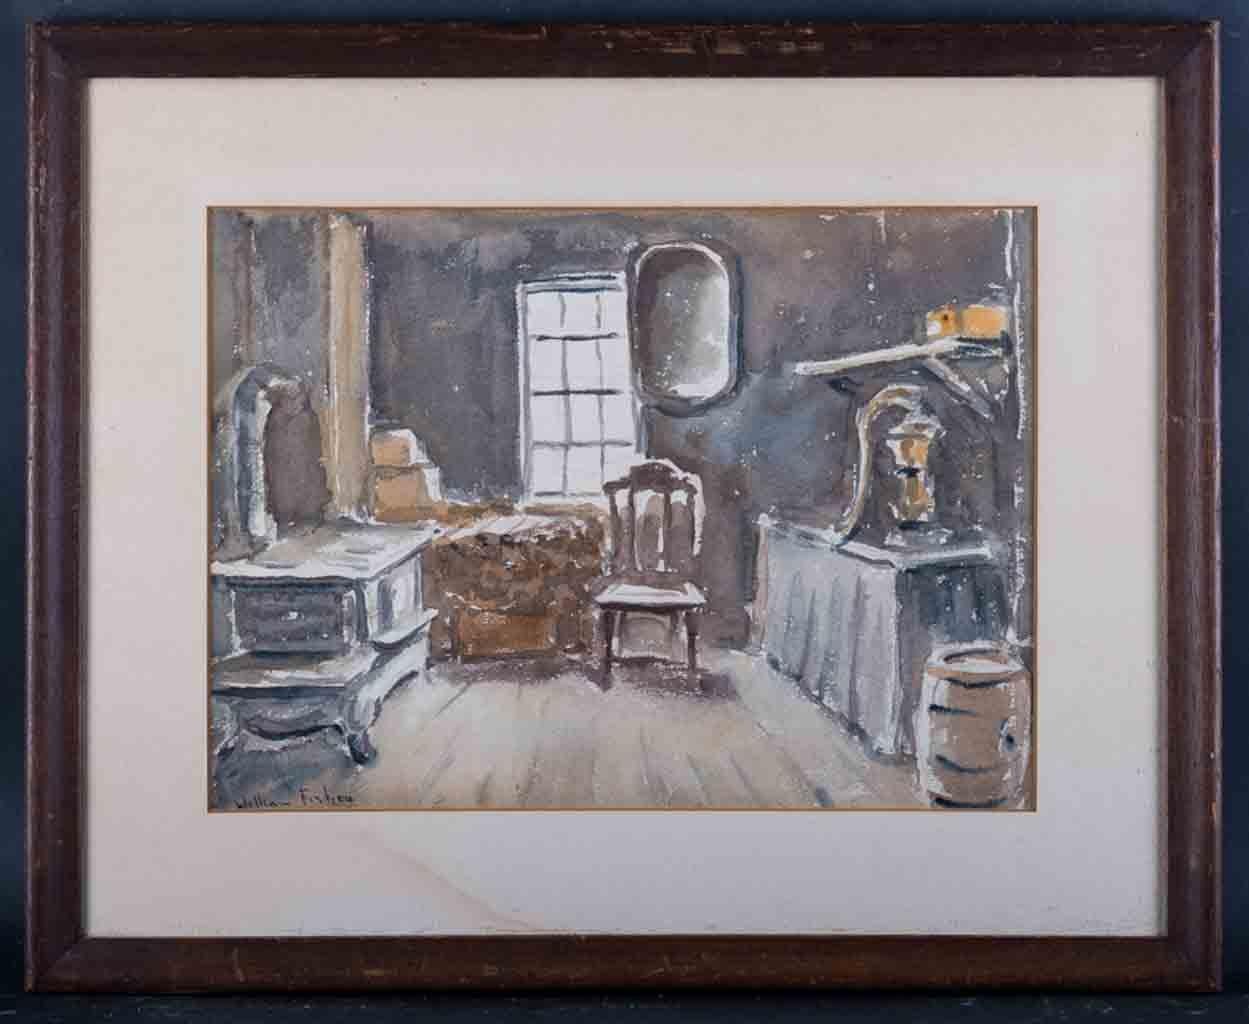 Title: Interior Scene
 Medium: Watercolor on paper
 Style: Impressionist
 Size: 11"" x 15""
 Frame Size: 18"" x 22""
 Age: 1940s
 Signature: William Fisher

Artist: William Fisher  (1891 - 1985)
William Fisher was active/lived in New York, Maine. 